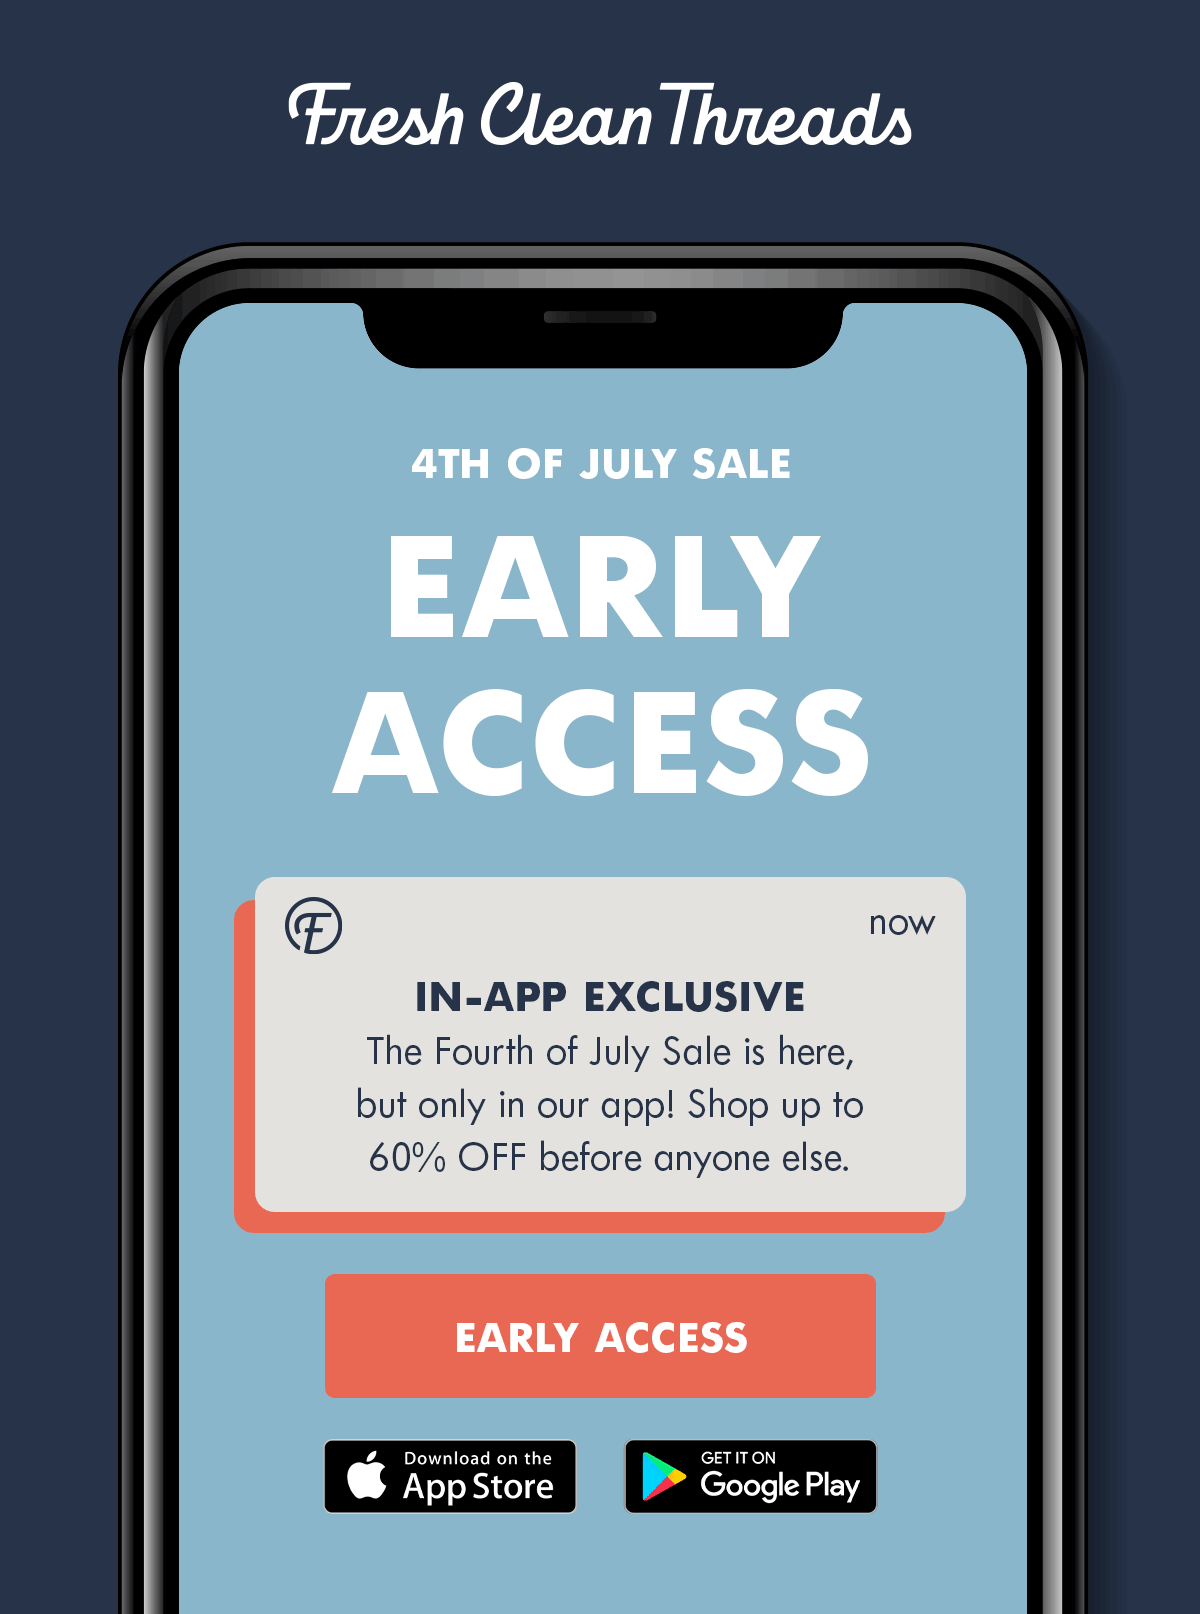 4th of july sale early access